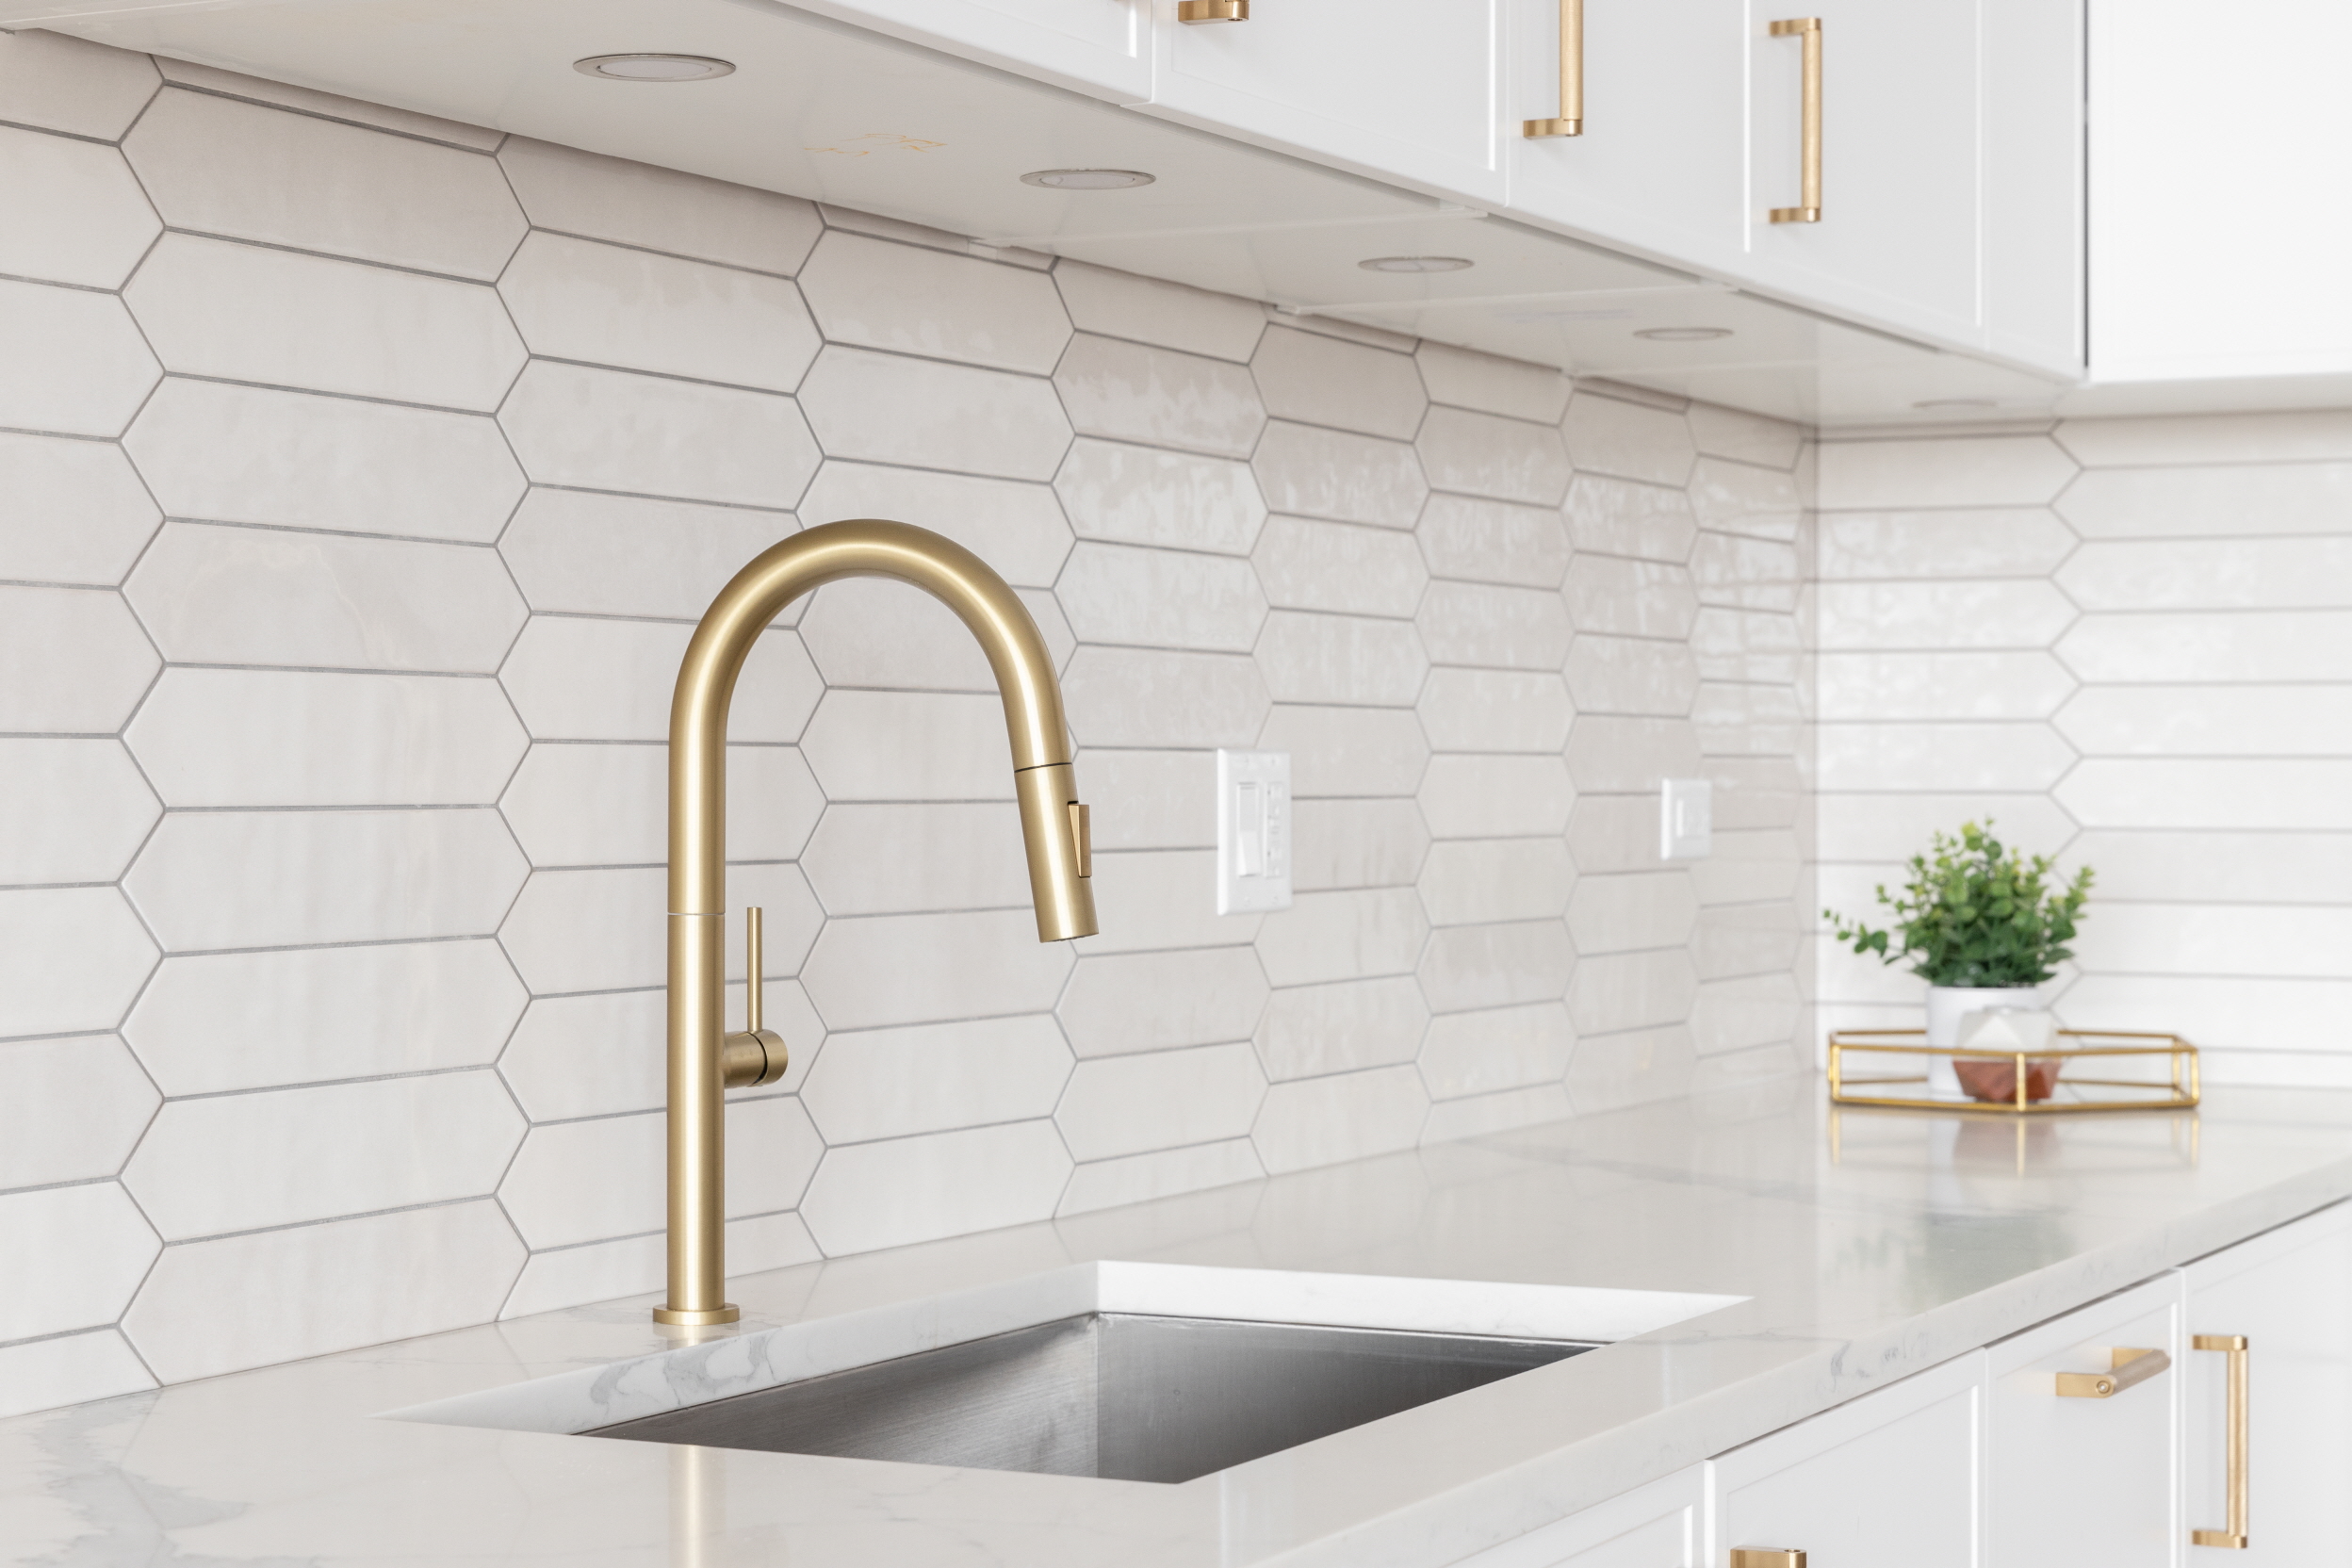 Affordably upgrade your kitchen with new cabinet doors, updated hardware, or a stylish faucet for a beautiful transformation without breaking the bank.